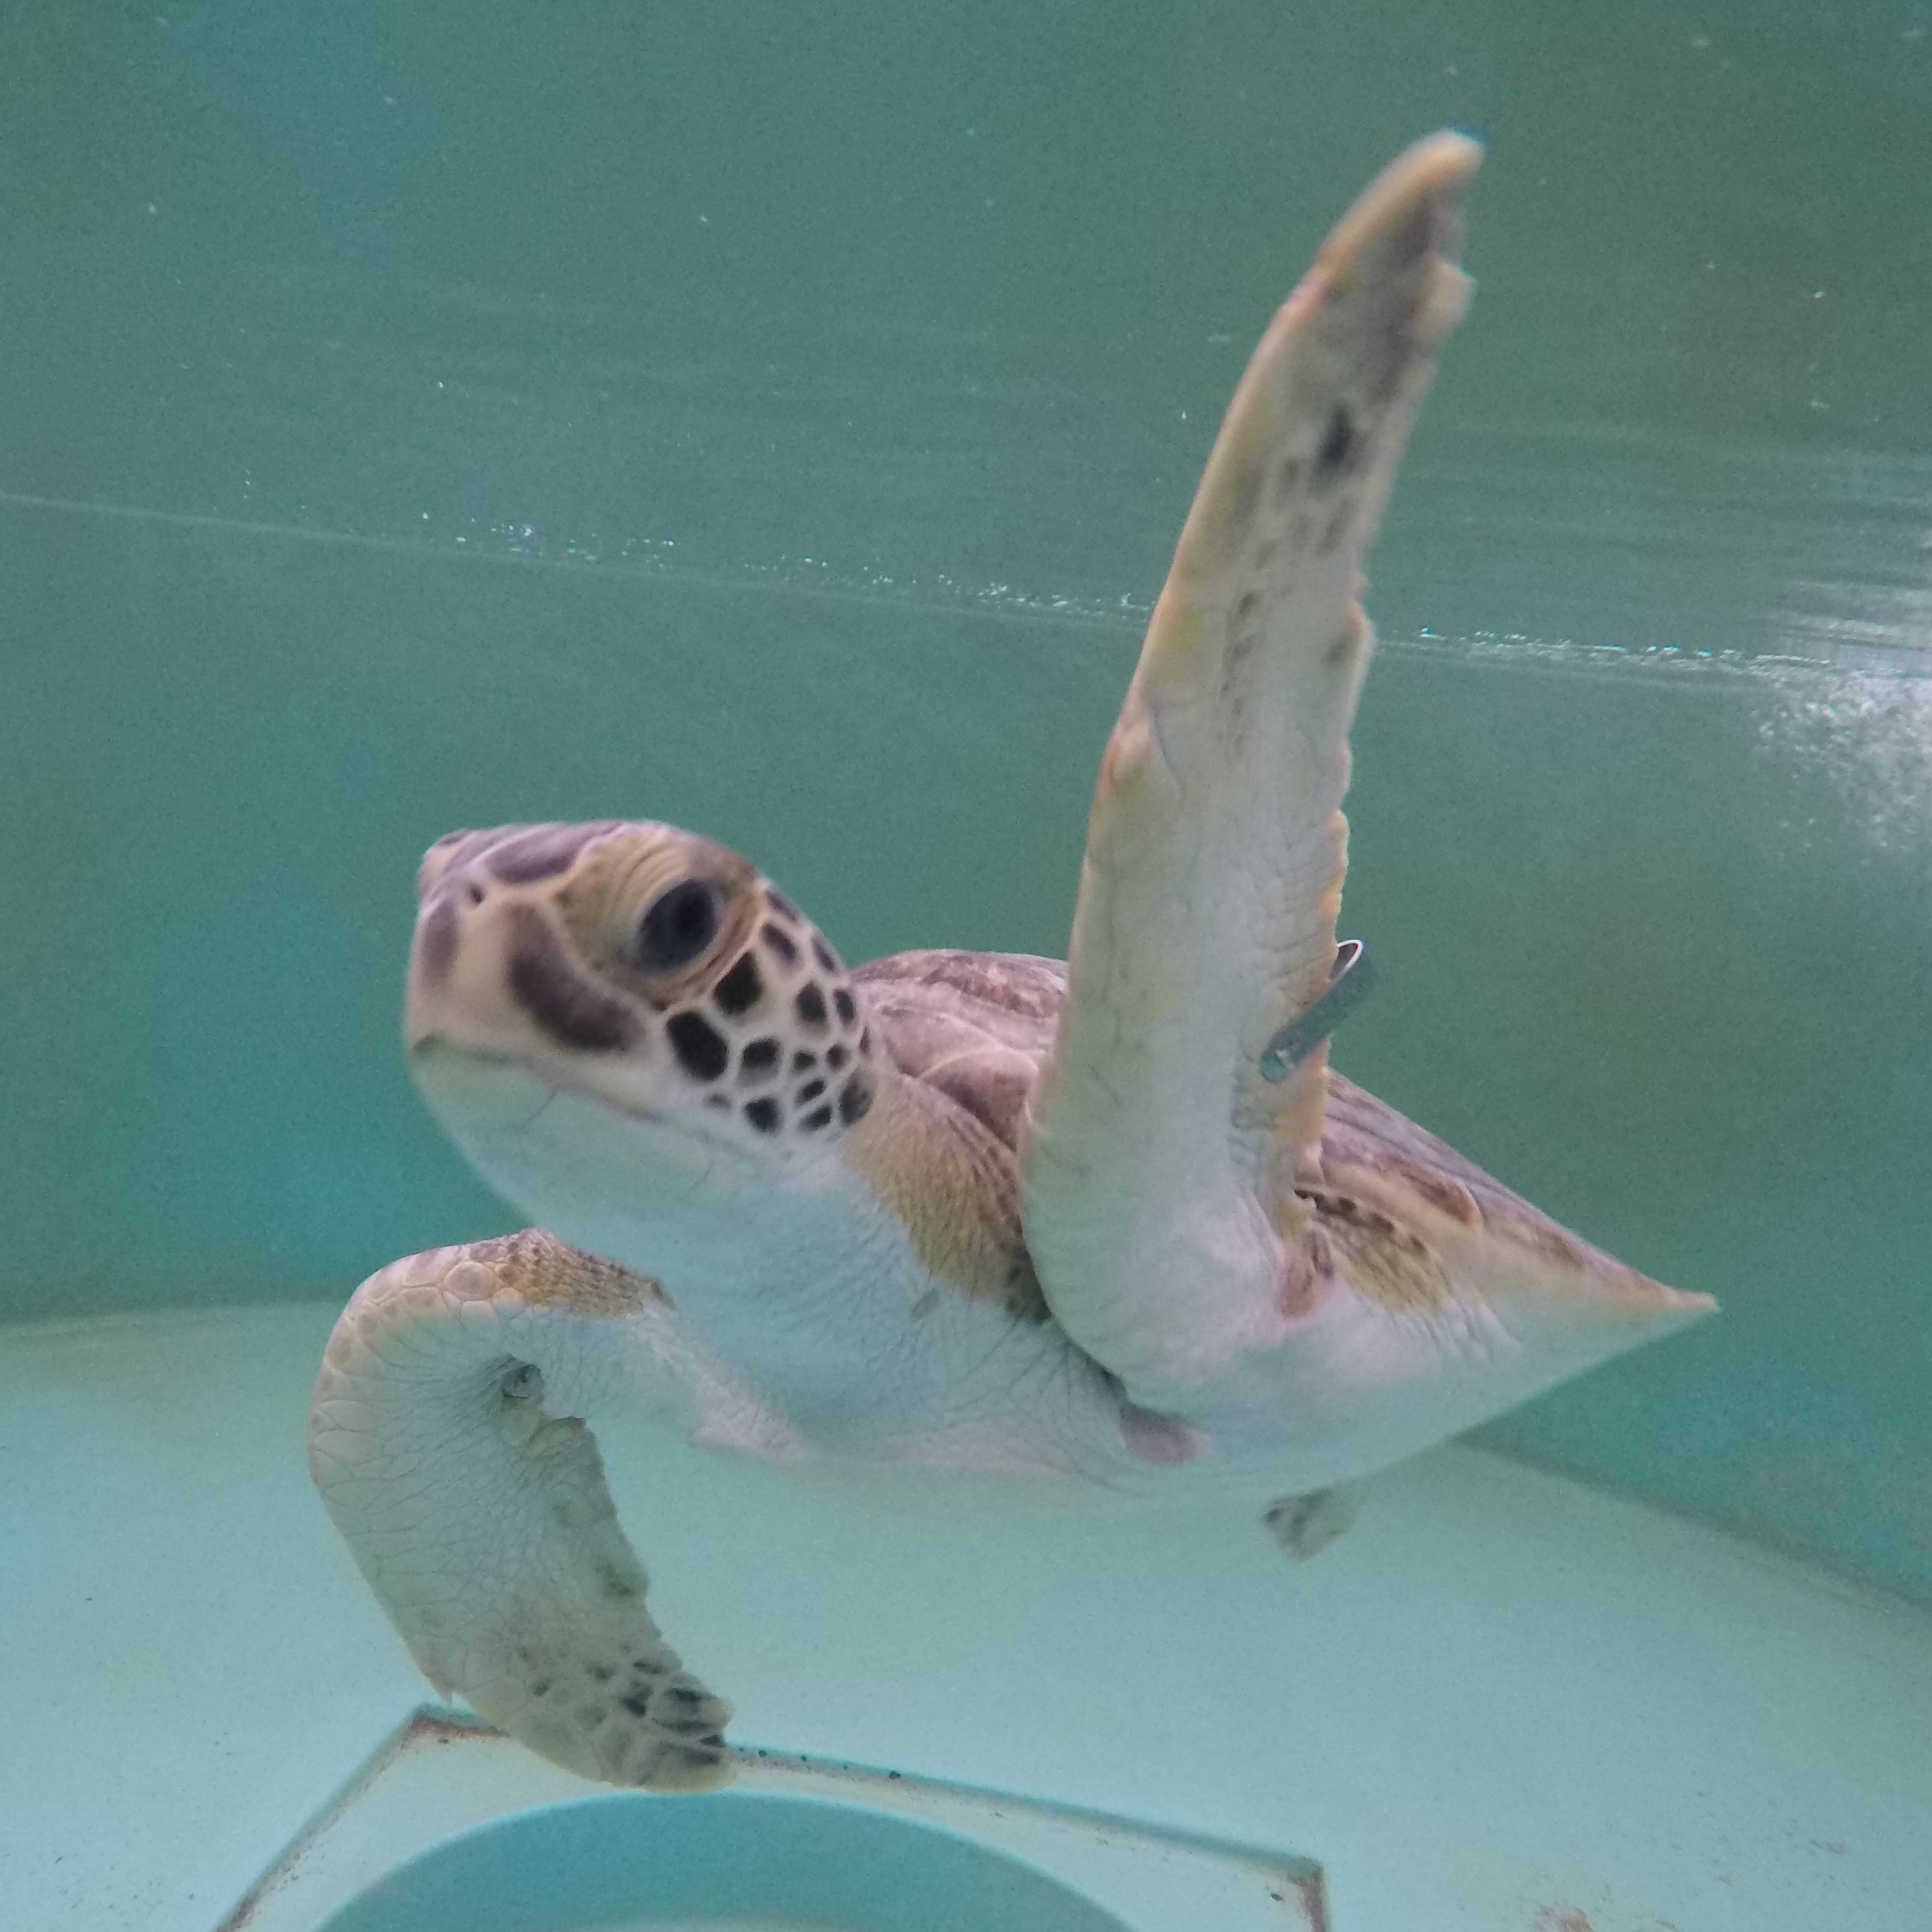 Sea Turtle Mantis Released July 16 at Wilbur-by-the-Sea in Volusia County